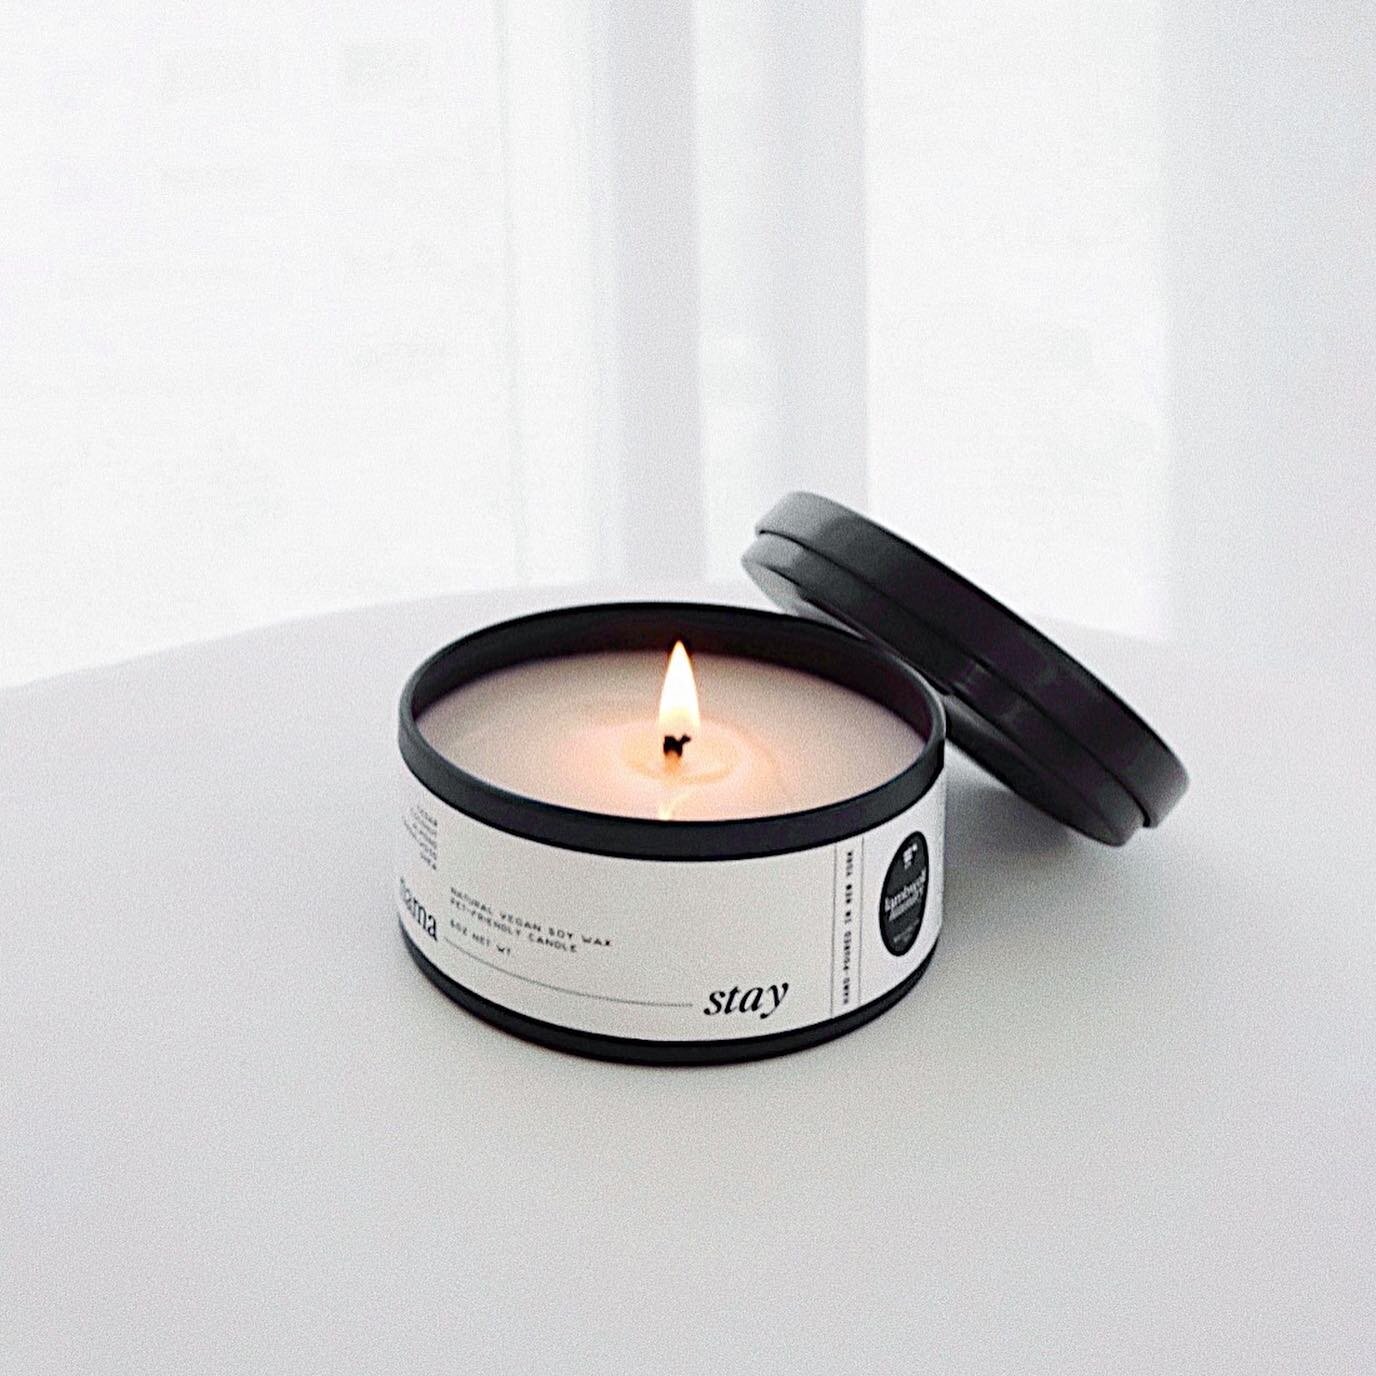 A moment of zen with Lambwolf&rsquo;s essential oil infused soy candle 🕯

I&rsquo;ve been lighting this up almost daily. The scent is just&hellip;. 🤍 Smells so much like my fav candle from diptyque too 

~

📷 @lambwolflaundry 
ft. Nama Stay Candle